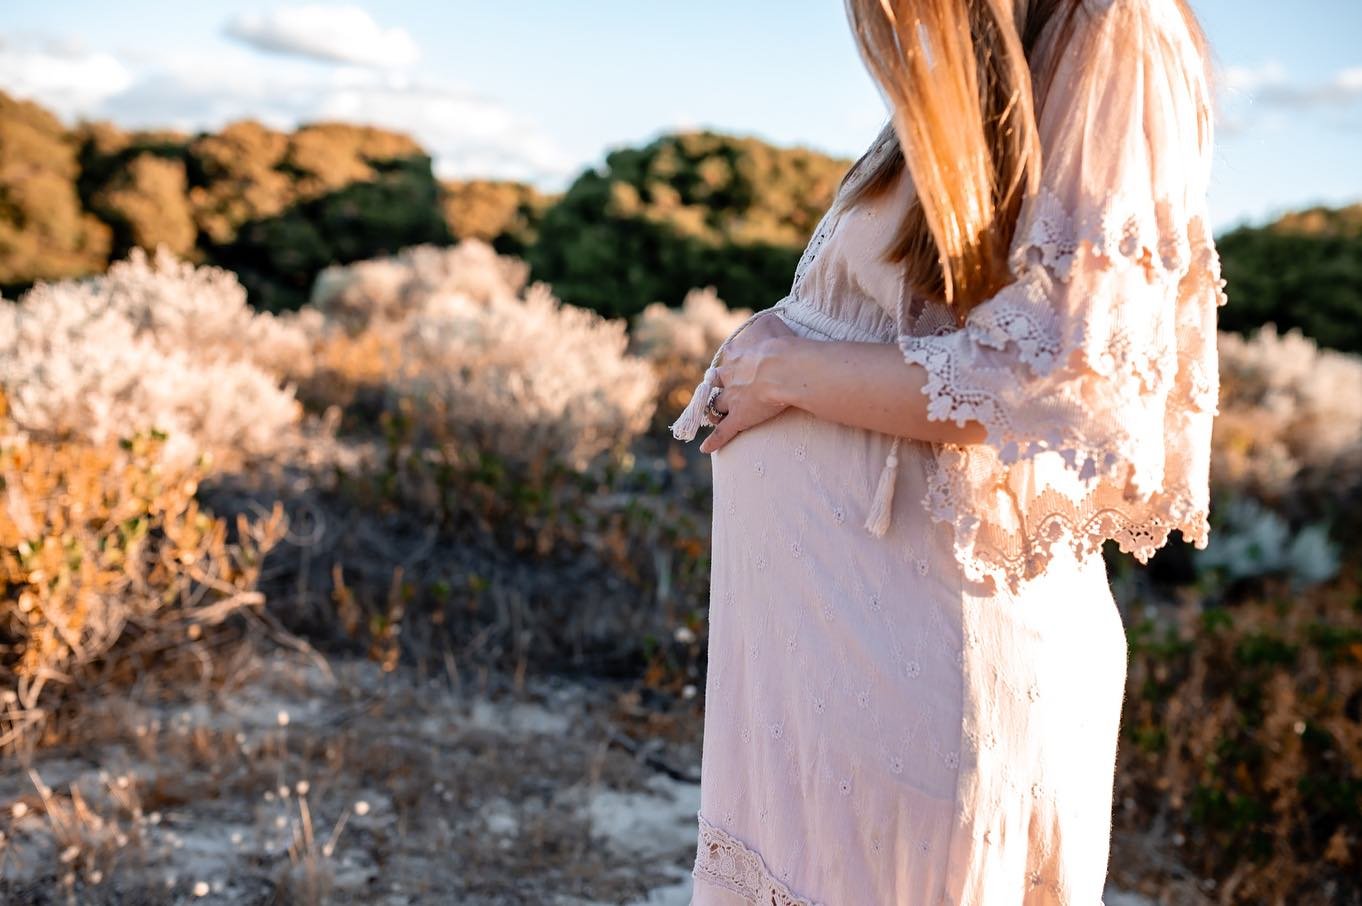 When it comes to maternity shoots, I&rsquo;m all about spontaneity and capturing the magic in those candid moments.

No stiff poses or awkward smiles here &ndash; just prompts that bring out the natural joy and excitement of this special time. 

Beca